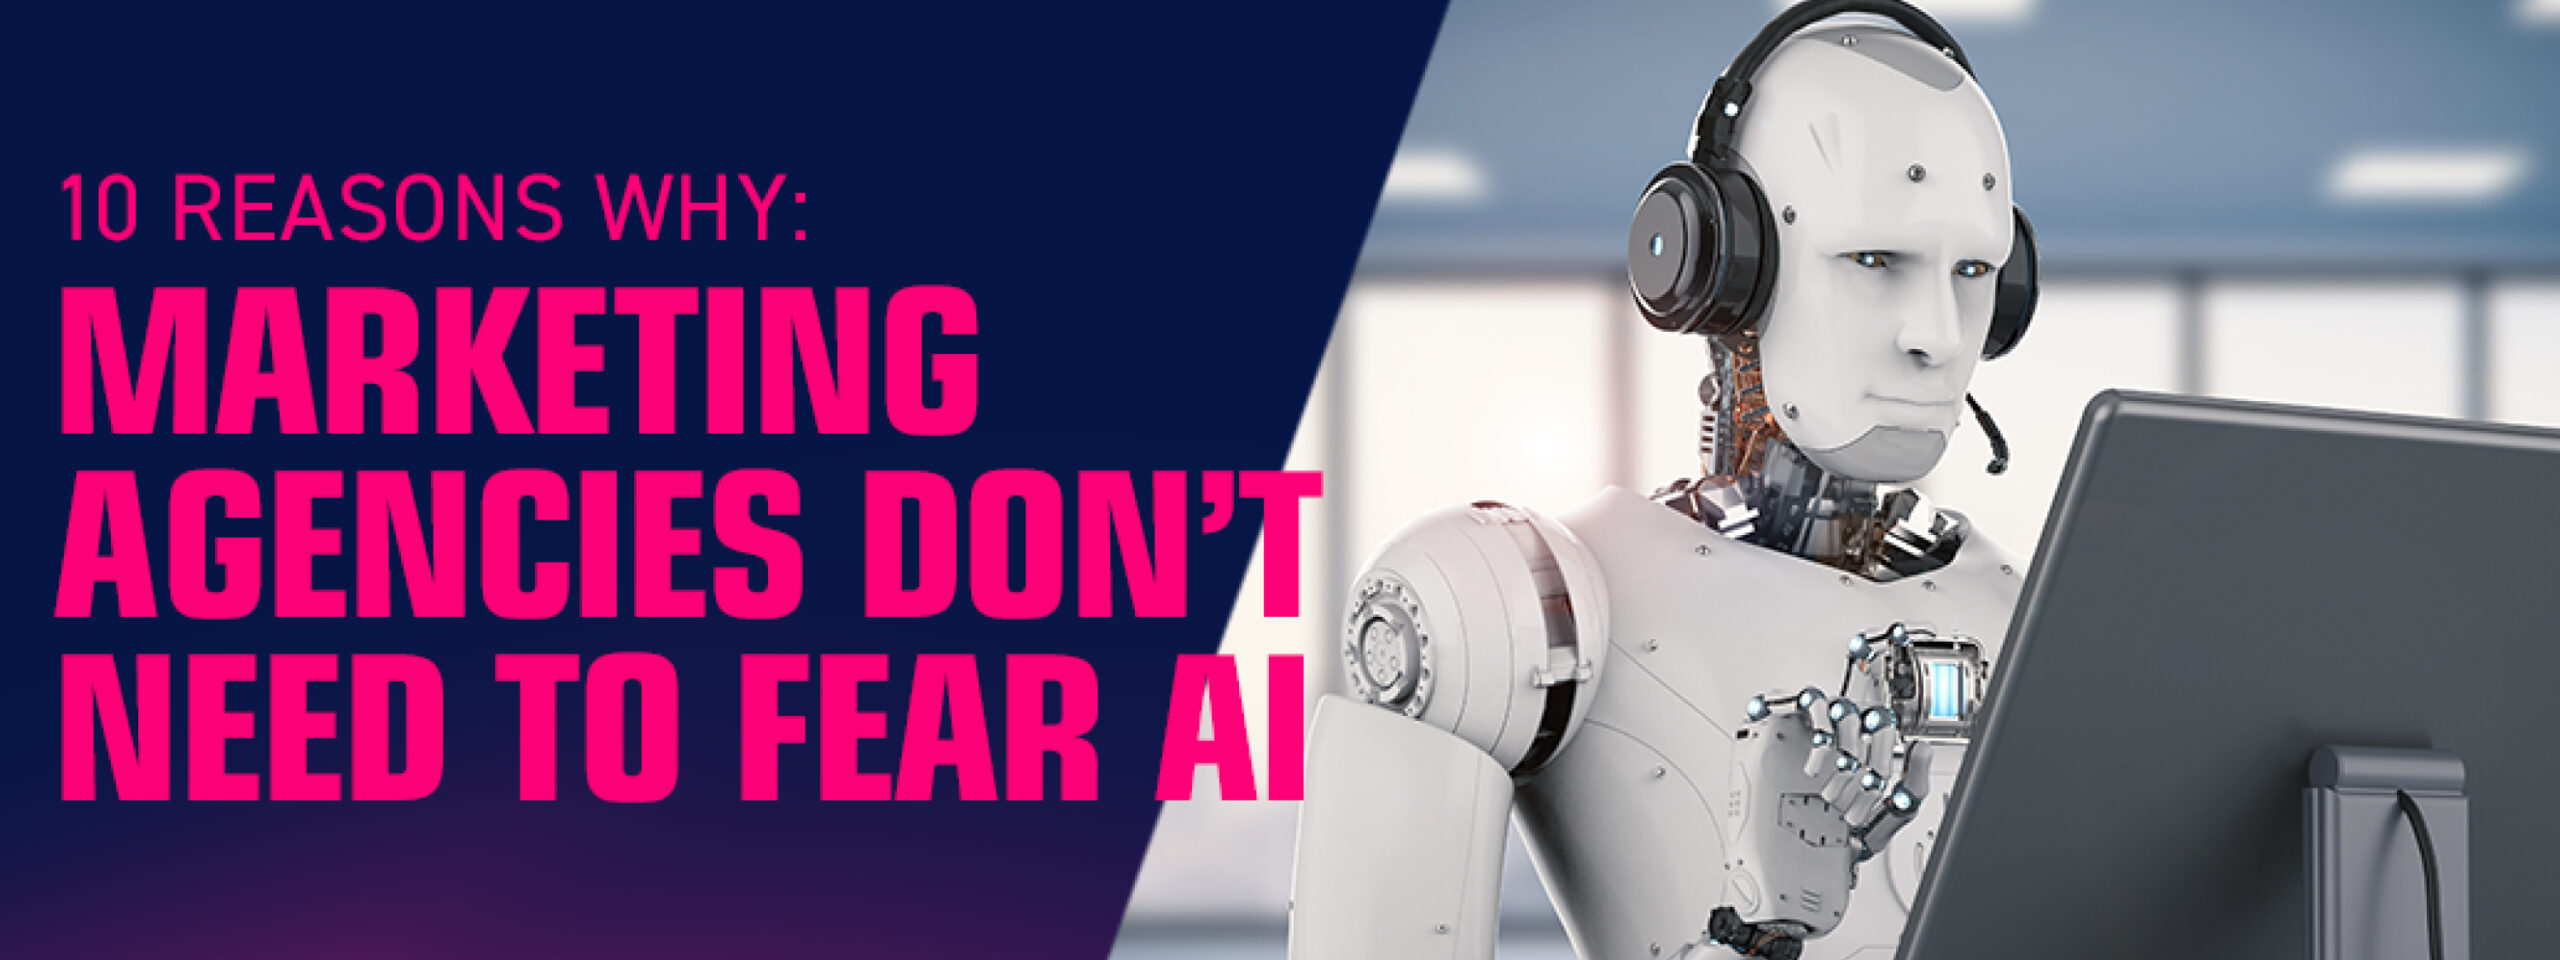 10 Reasons Why Marketing Agencies Don’t Need to Fear AI